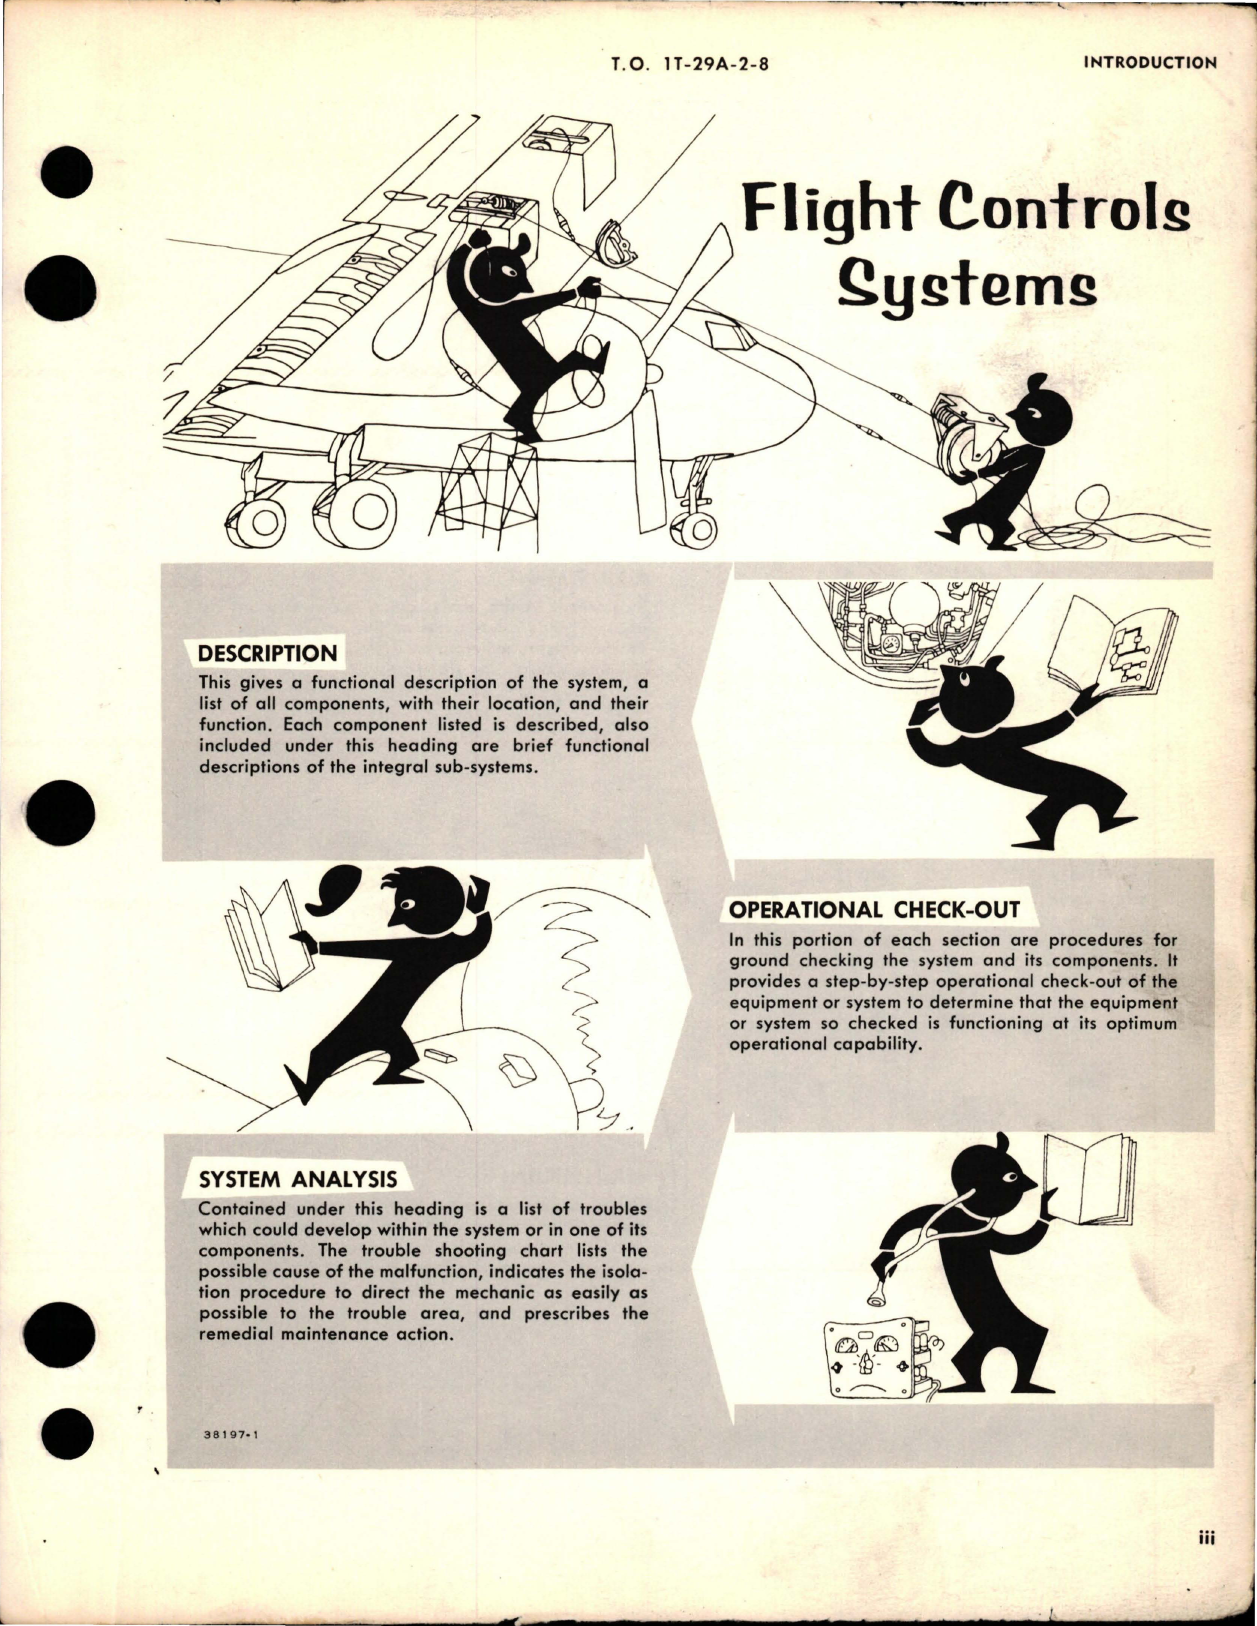 Sample page 5 from AirCorps Library document: Maintenance for Flight Control Systems, T-29A, T-29B, T-29C and T-29D